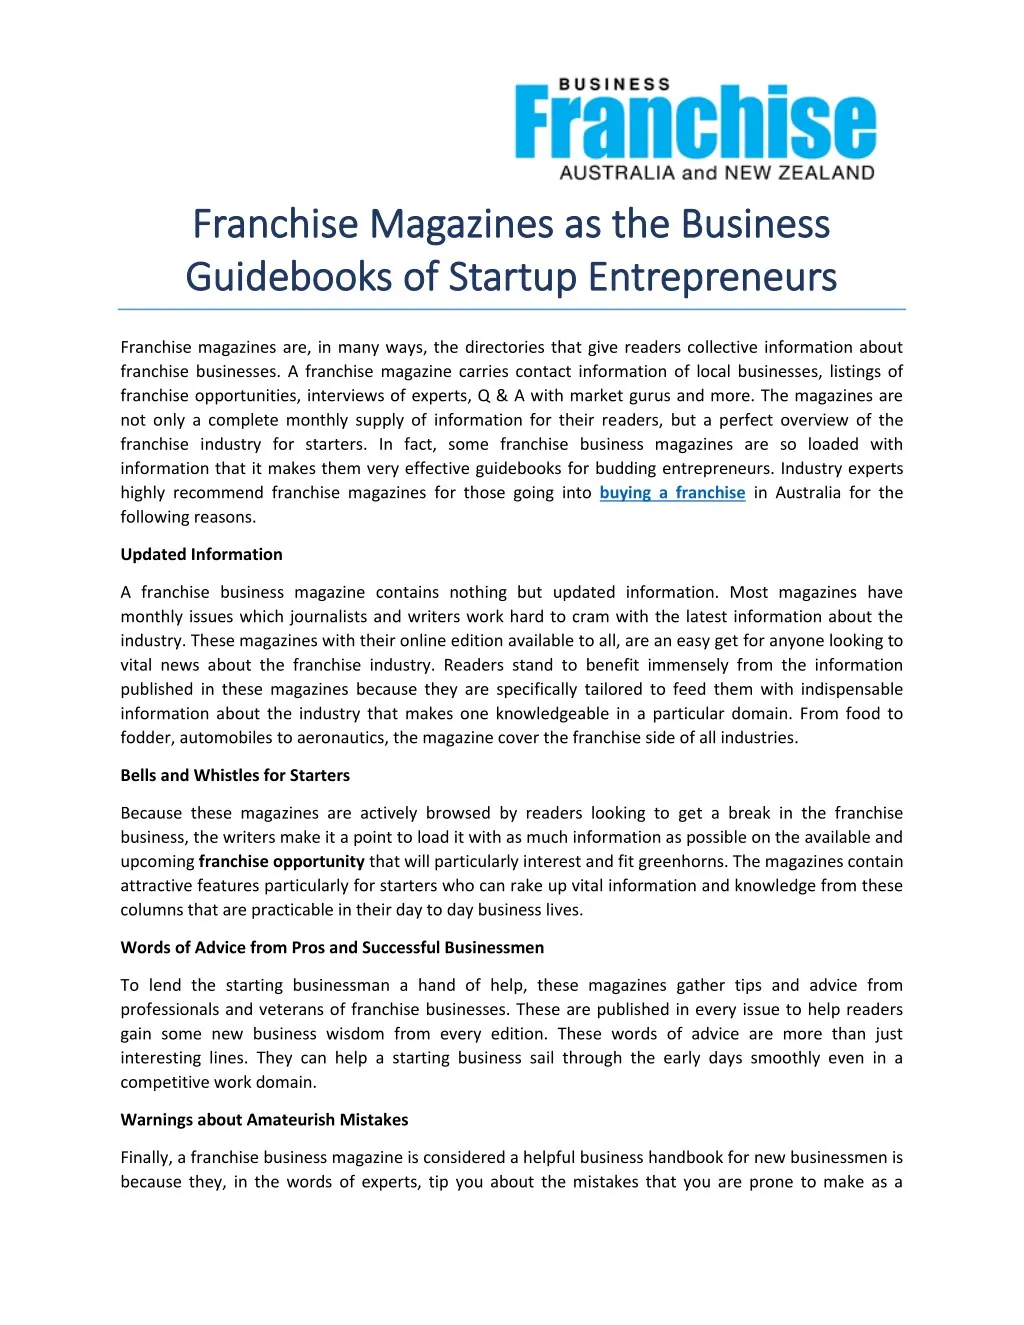 franchise magazines as the business franchise